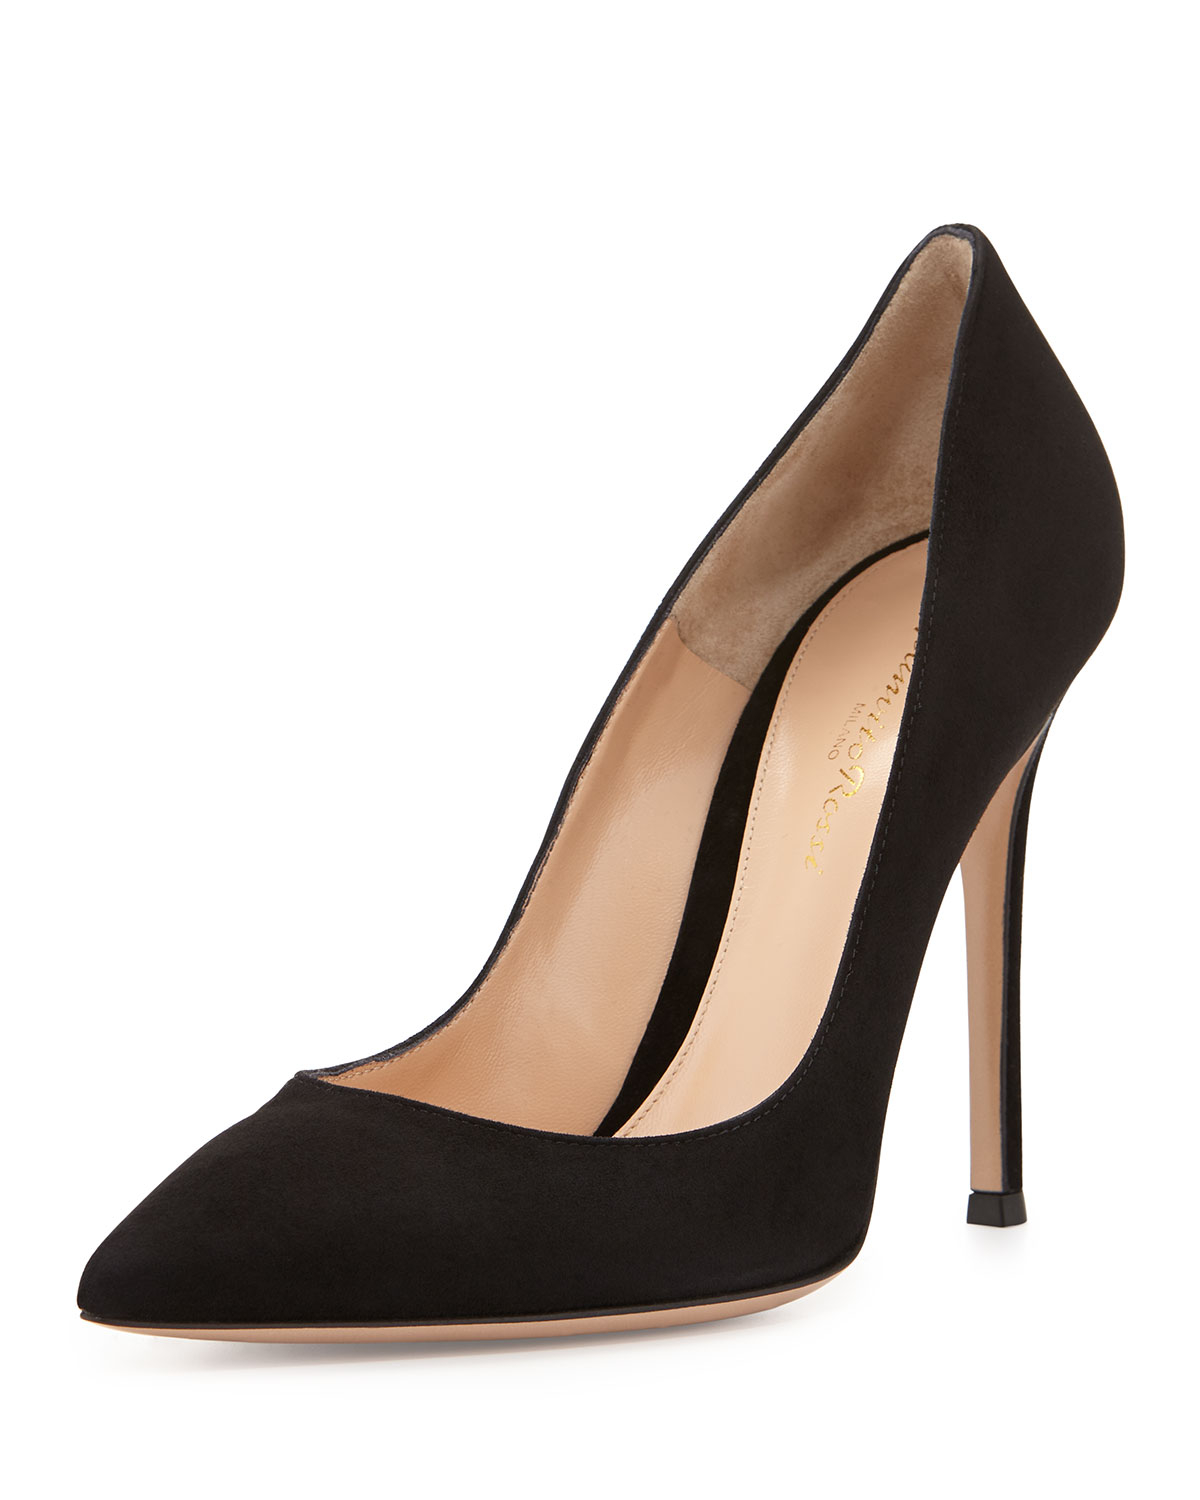 Lyst - Gianvito Rossi Suede Point-toe Pump in Black